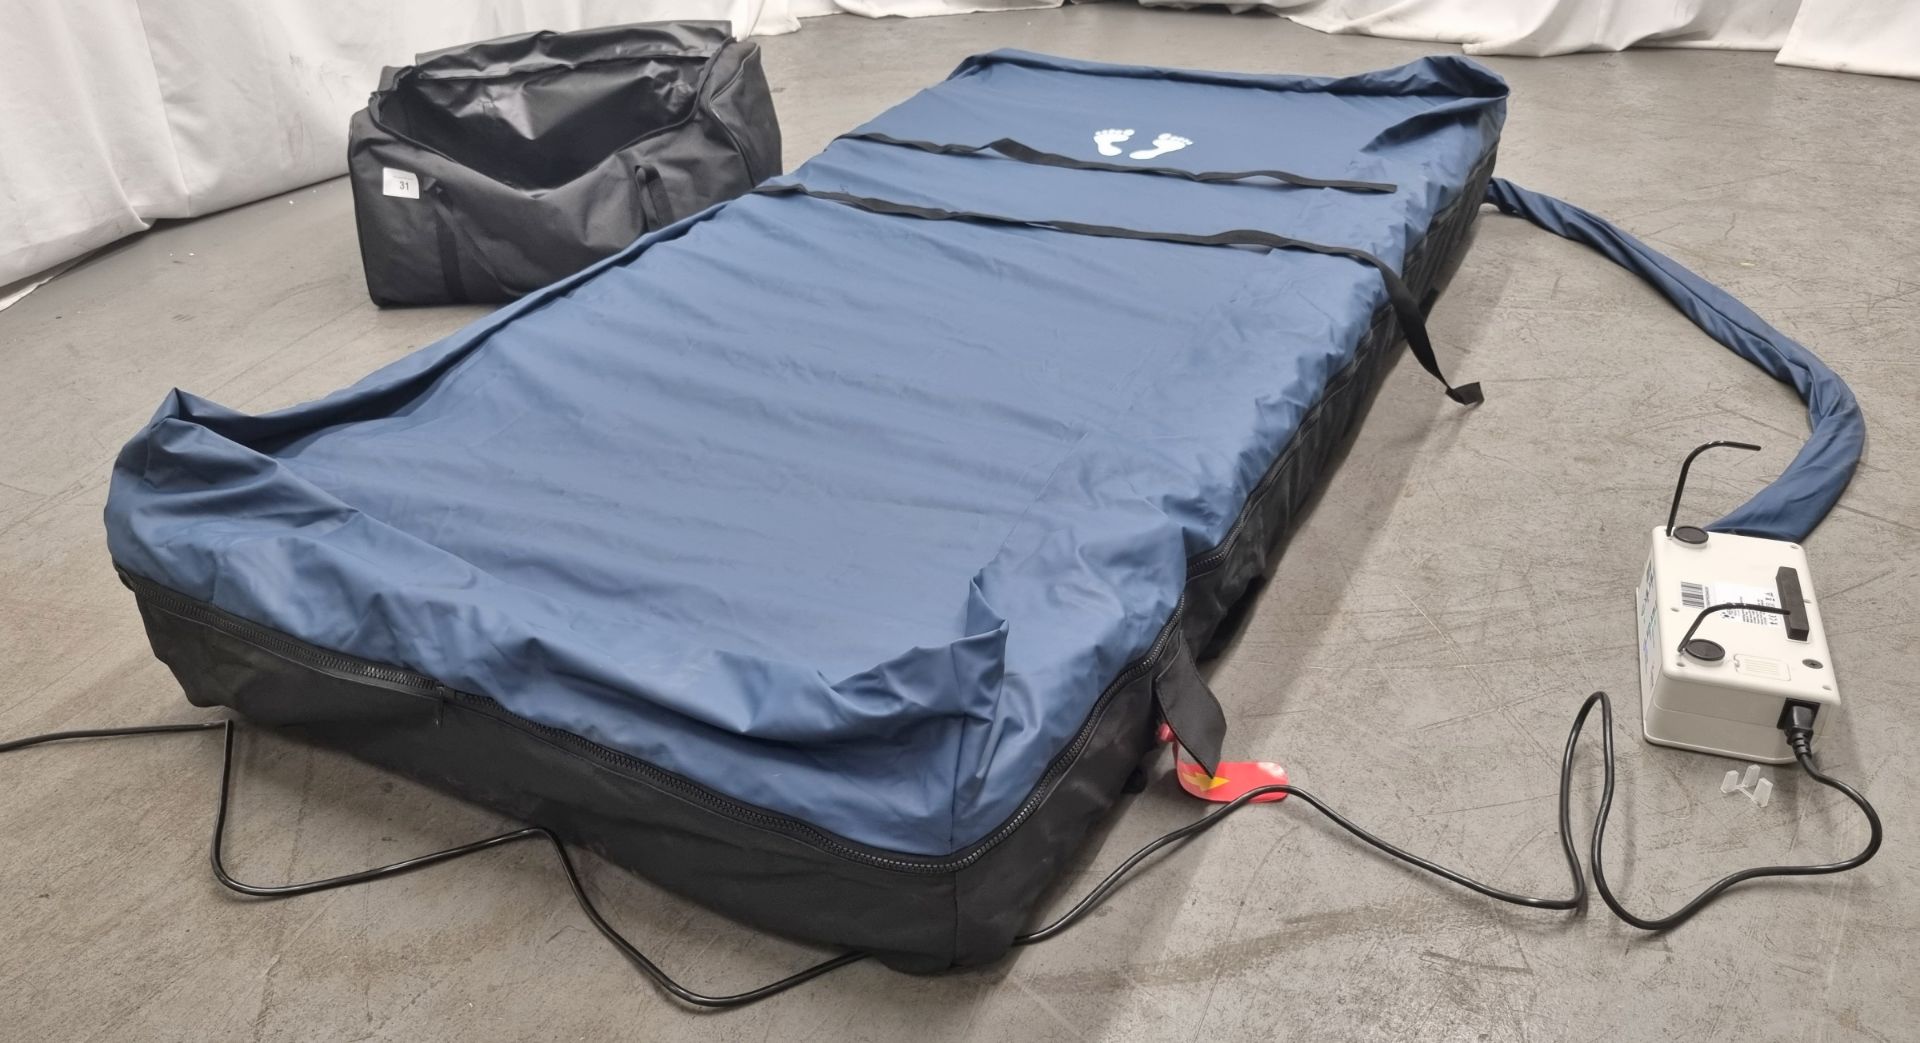 10x Herida Argyll II dynamic airflow mattress system with digital pump in carry bags (boxed) - Bild 6 aus 10